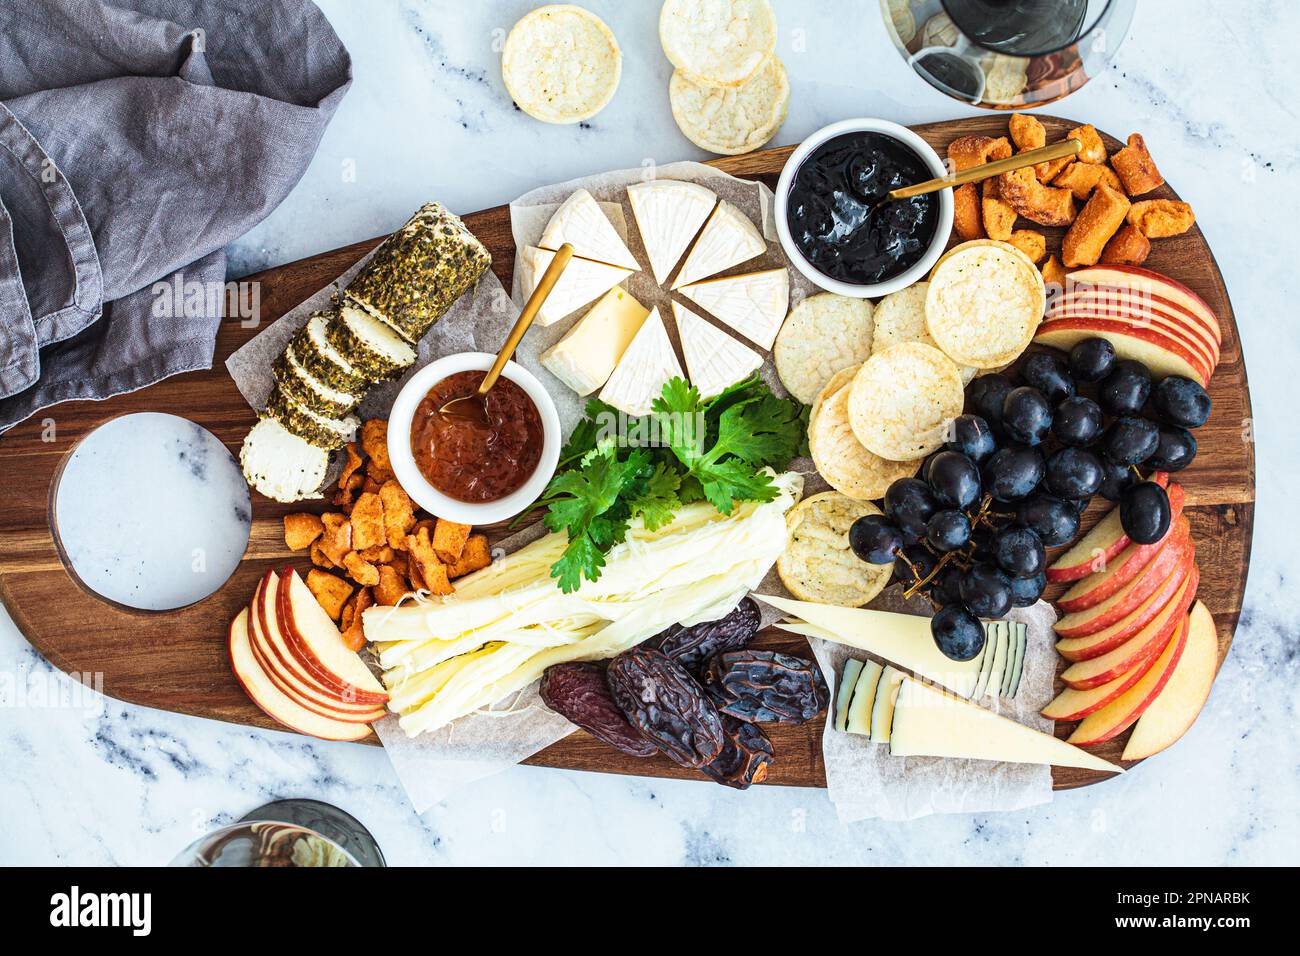 Cheese board with fruits and crackers, top view. Party food, food platter, european appetizers. Stock Photo